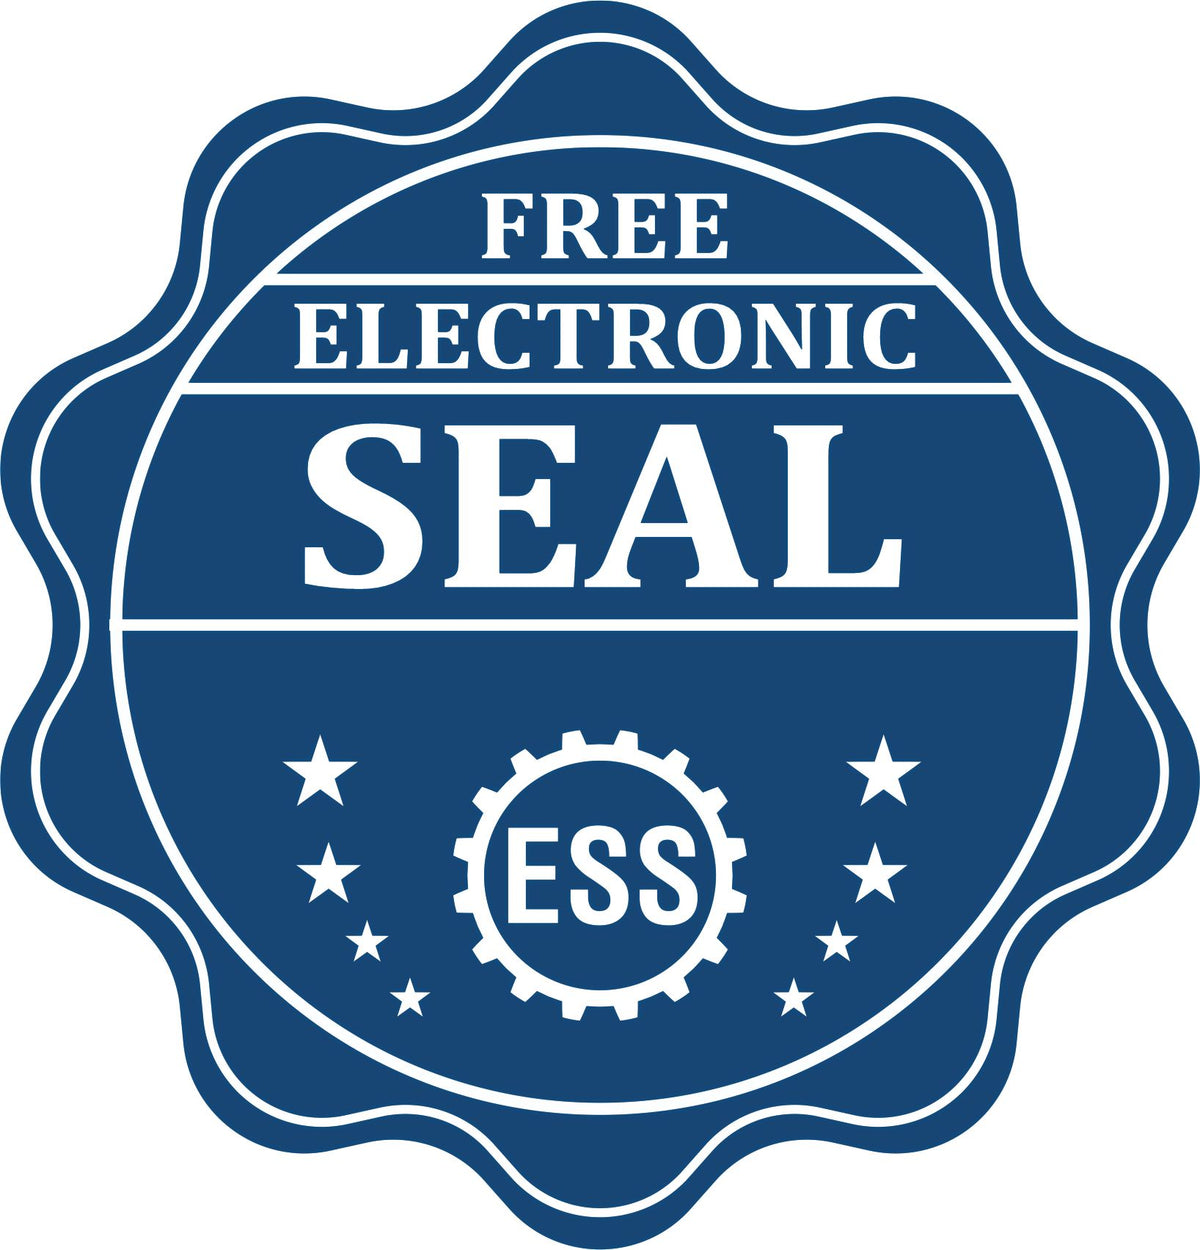 A badge showing a free electronic seal for the Soft District of Columbia Professional Geologist Seal with stars and the ESS gear on the emblem.